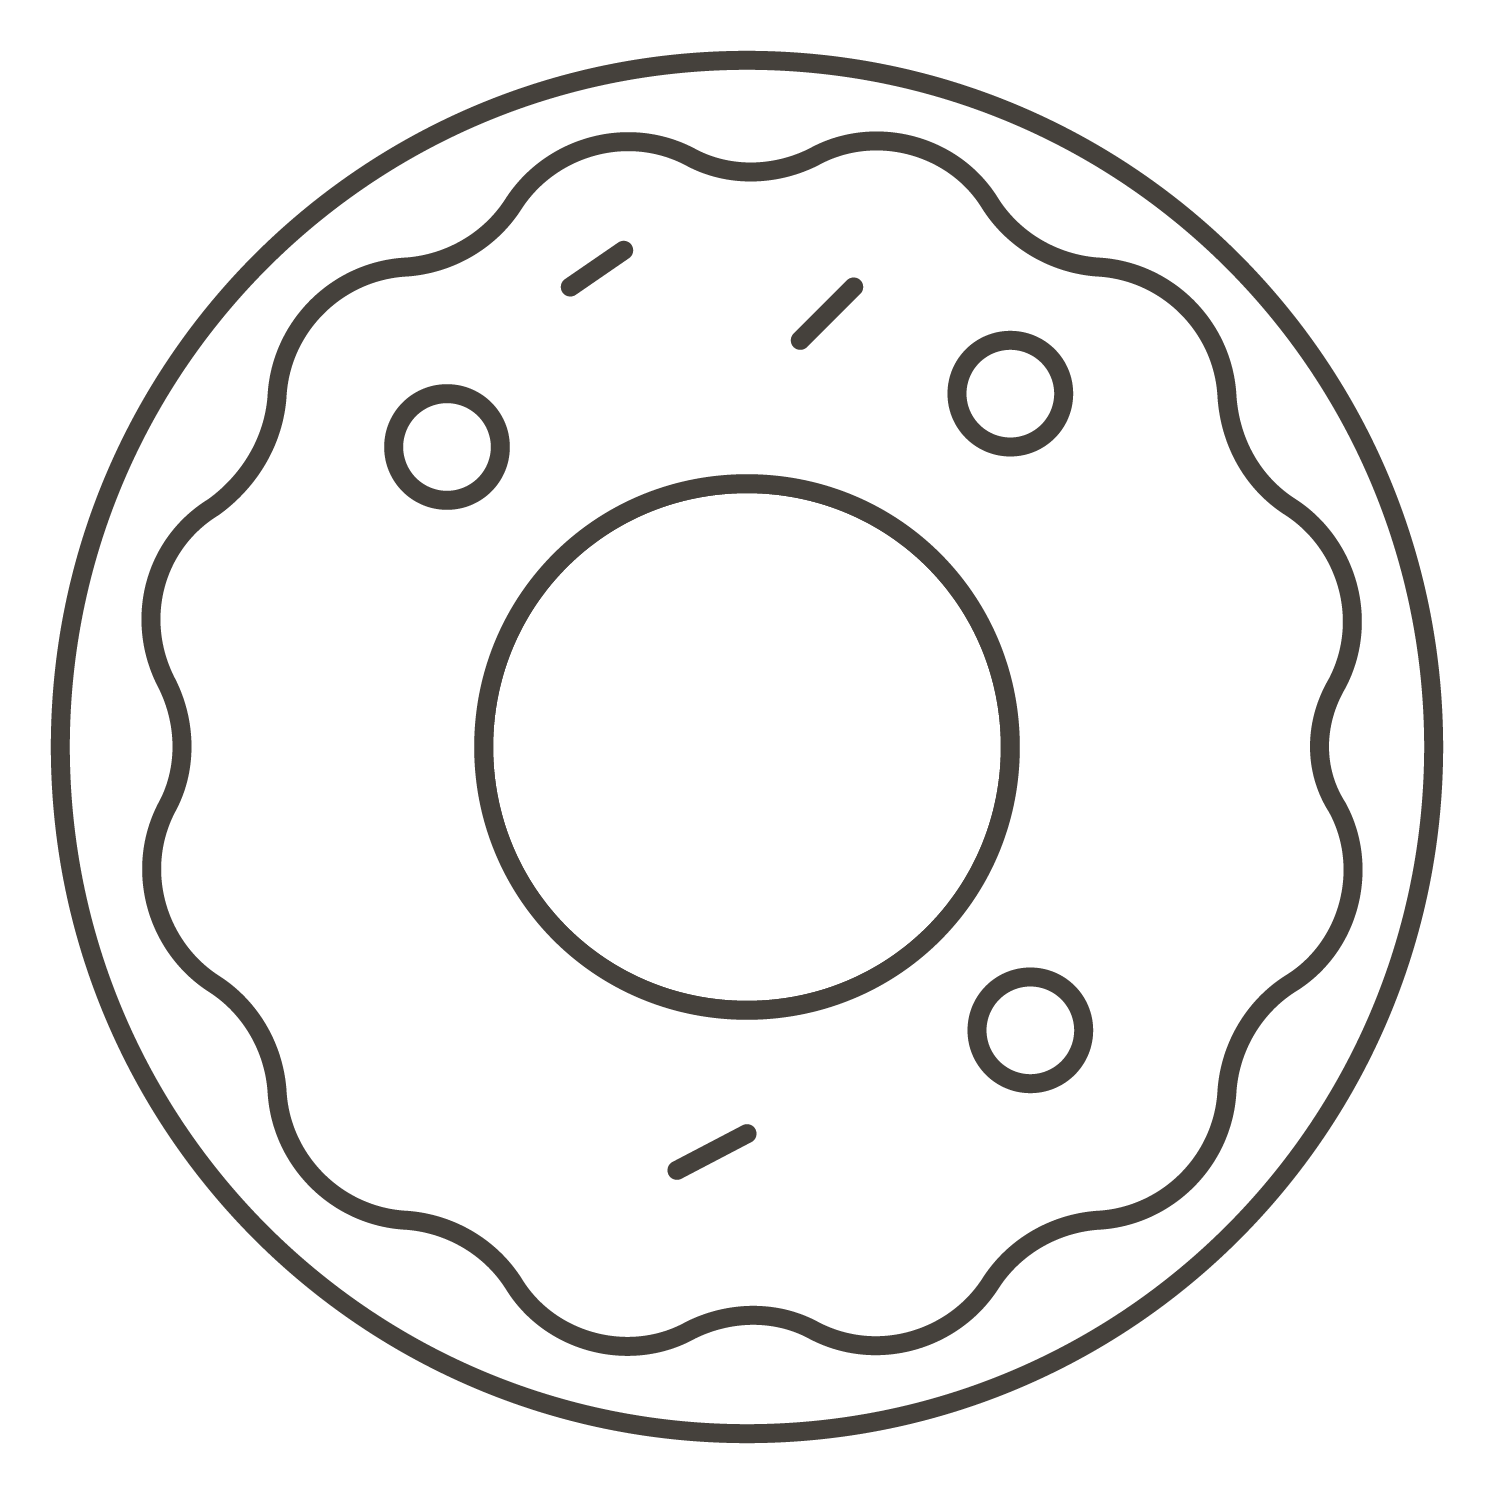 Doughnut coloring page - ColouringPages